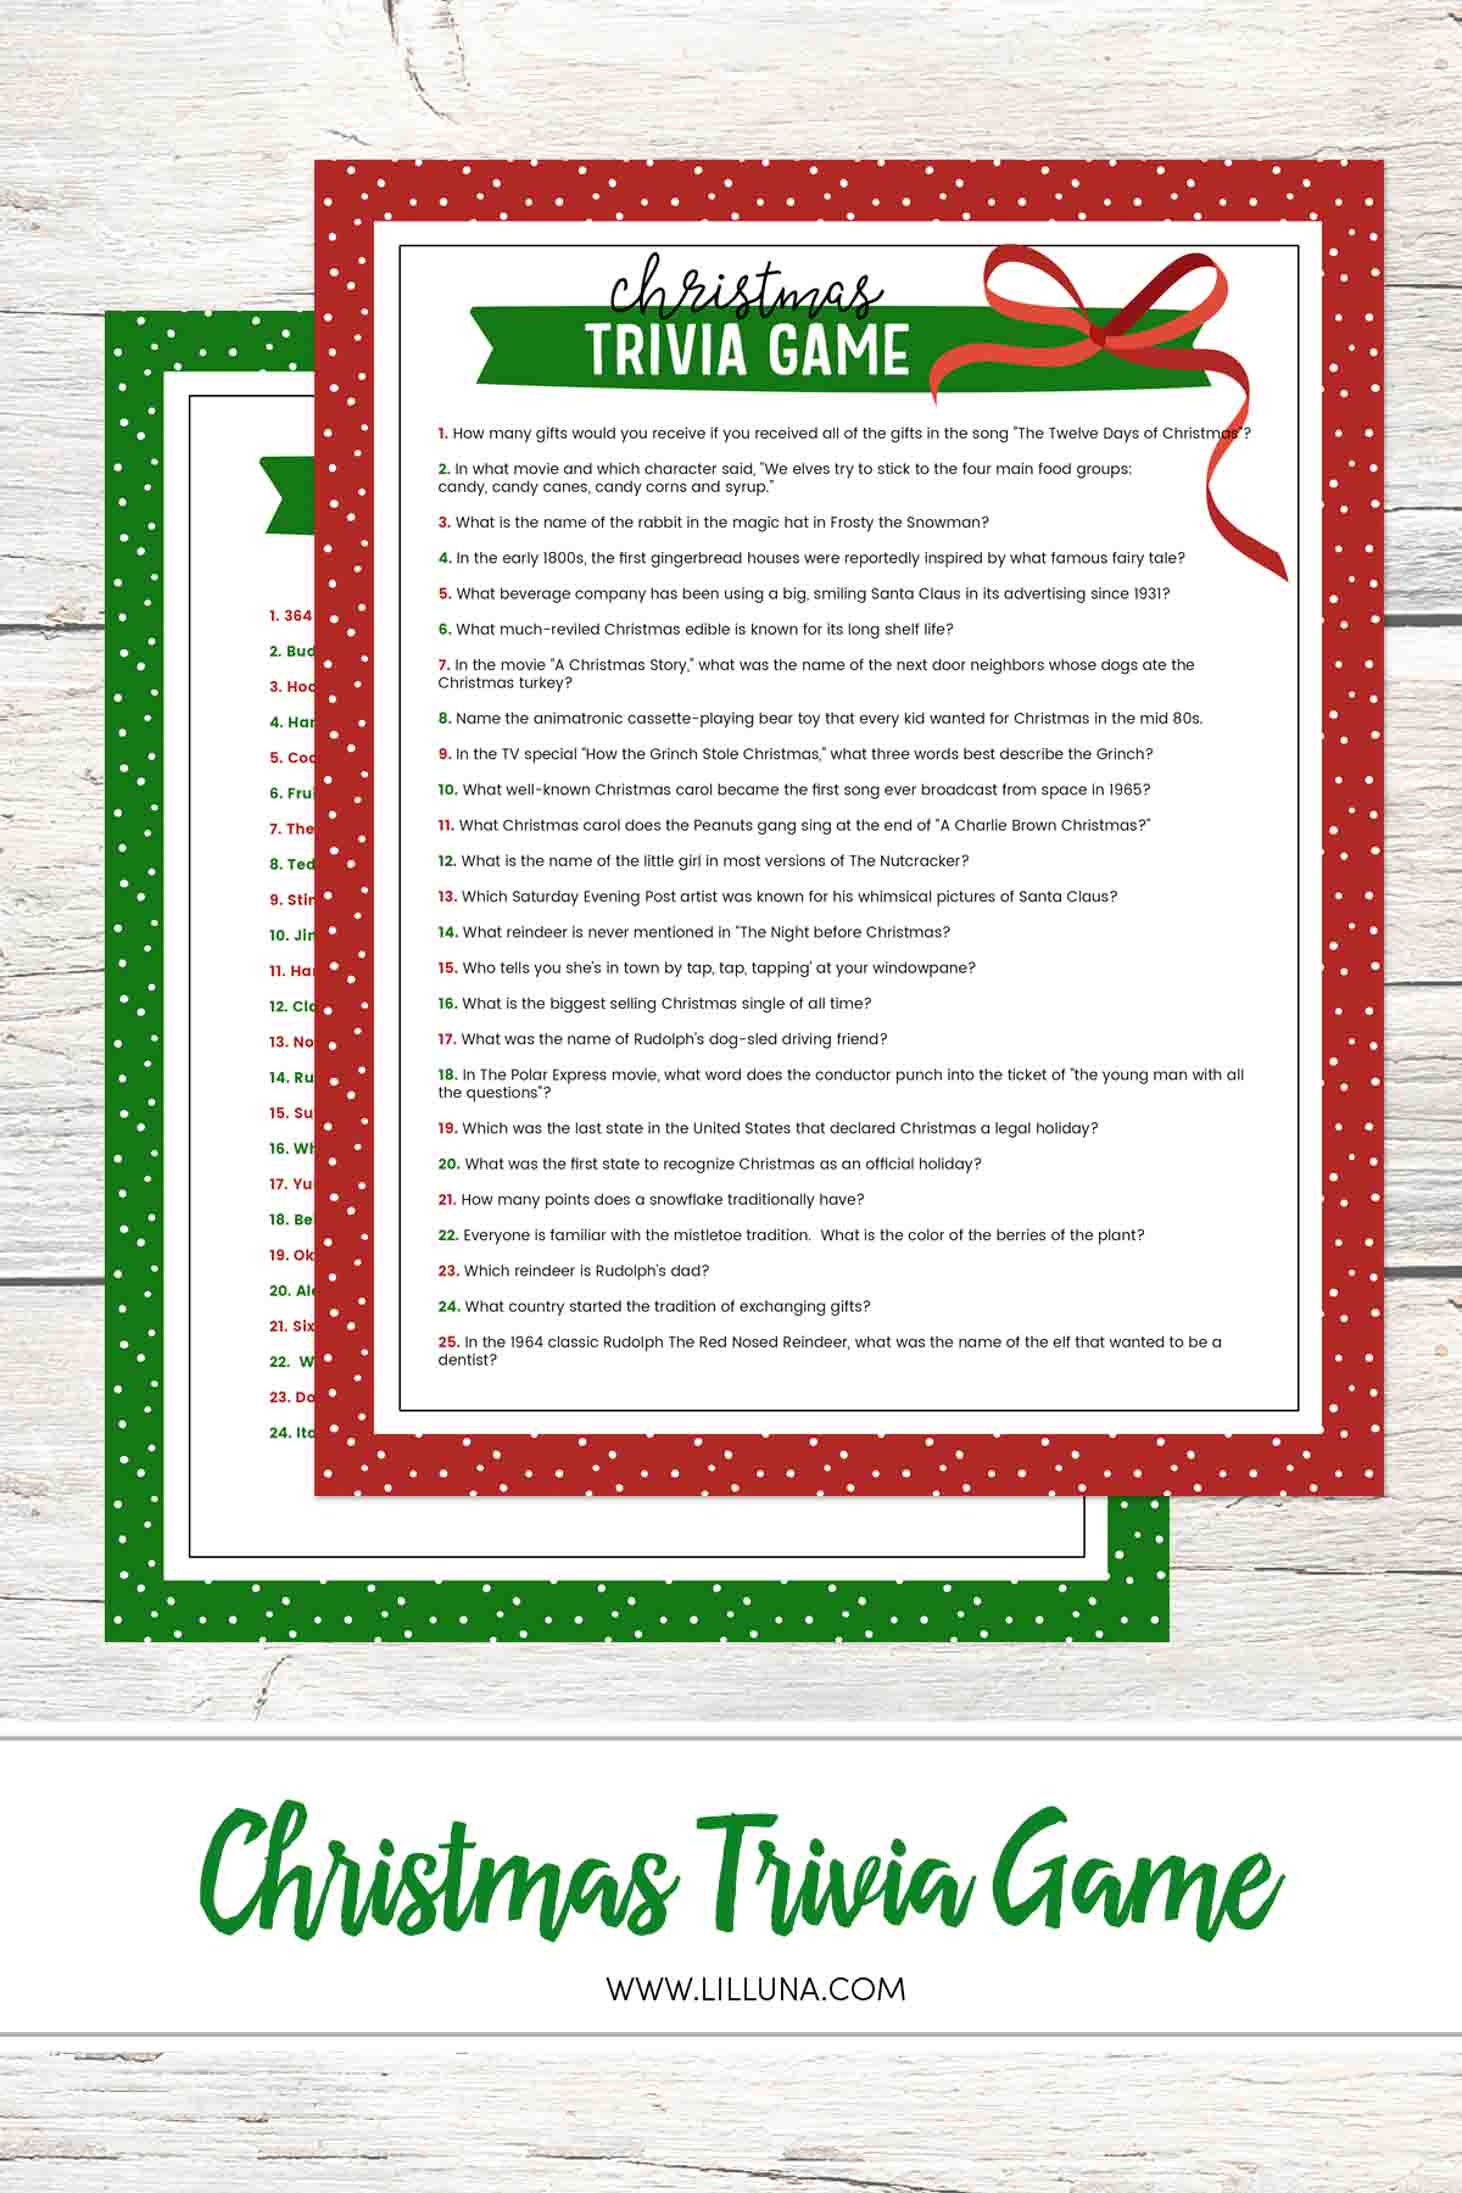 Christmas Trivia Game printables ready for download.